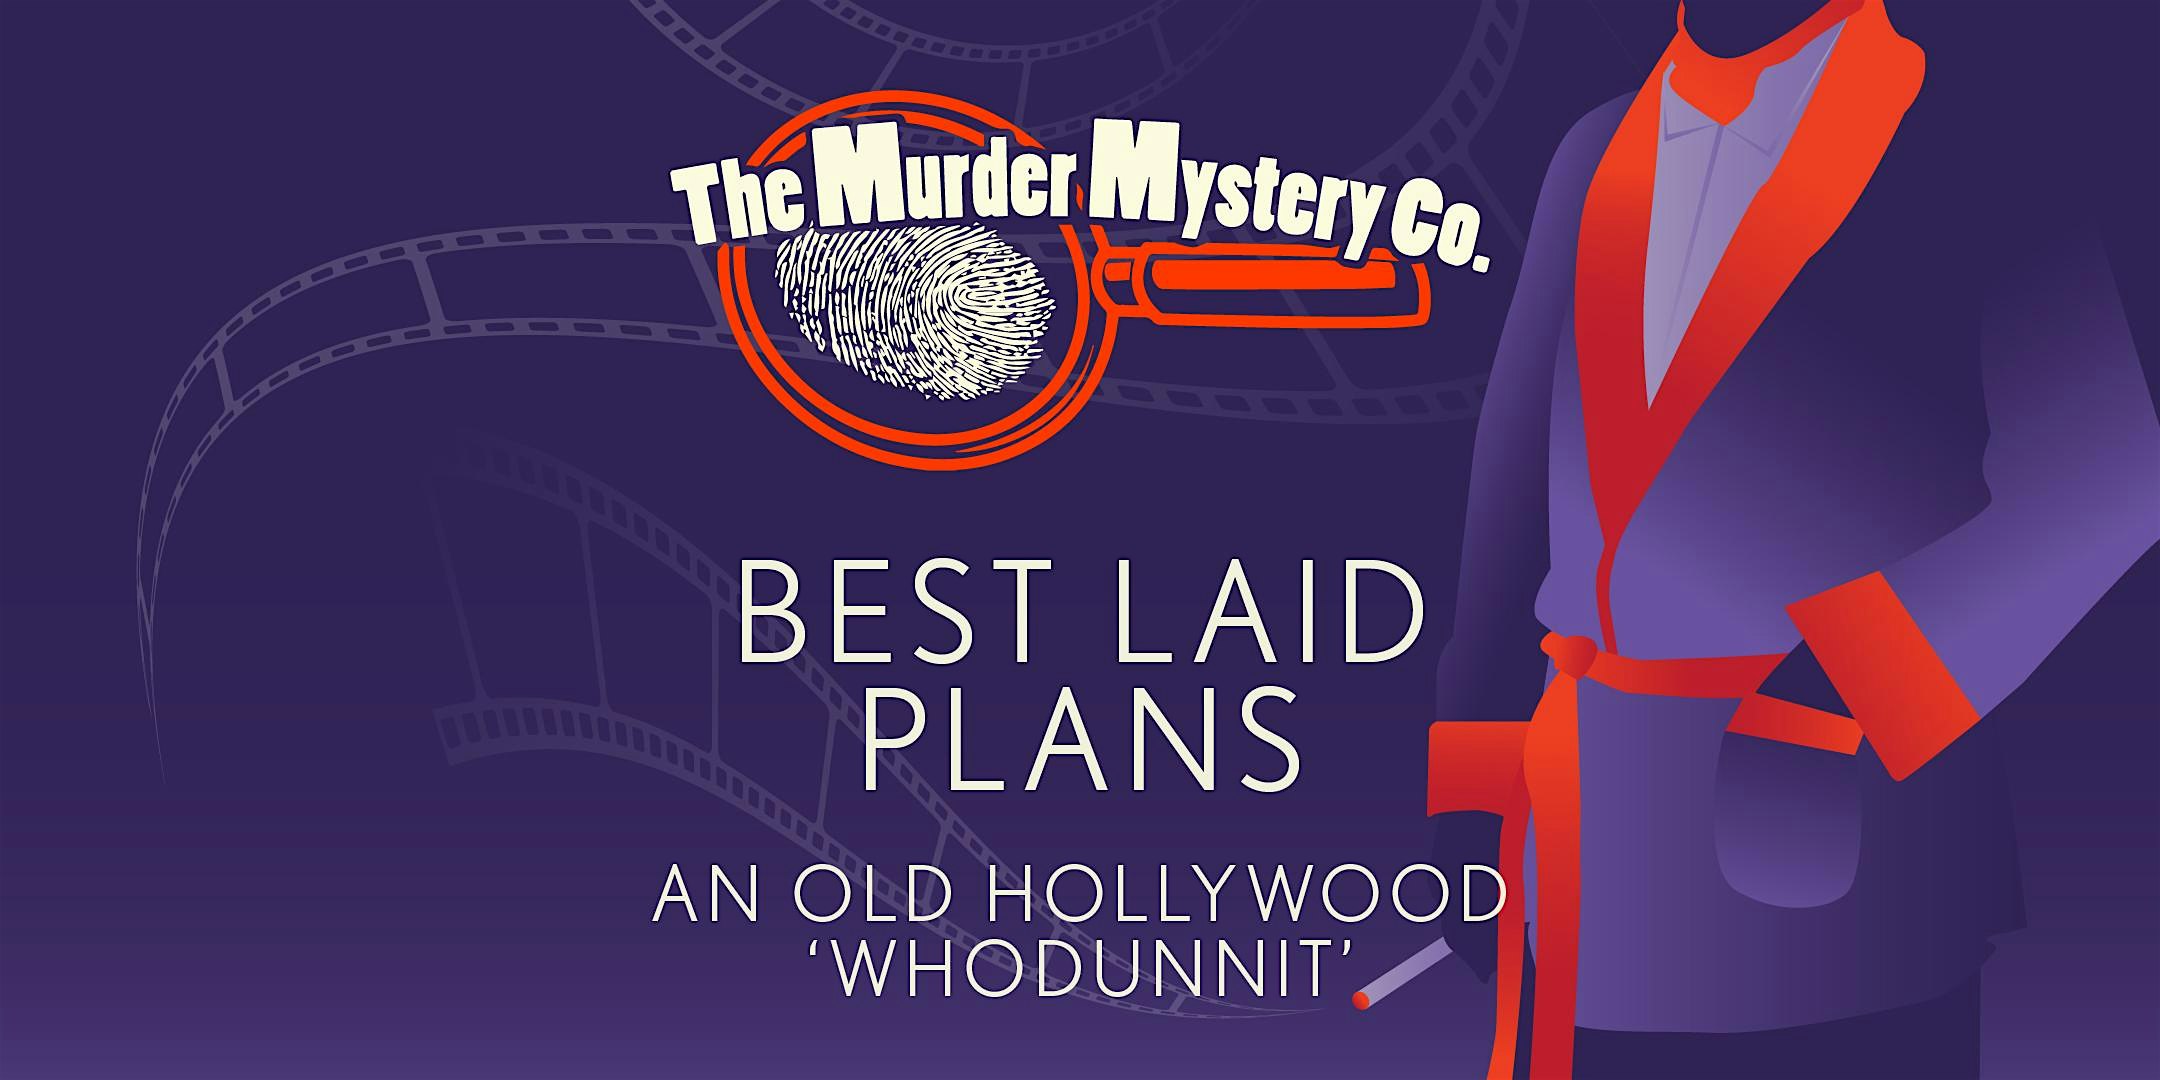 Best Laid Plans: Murder Mystery Dinner Theater Show in Baltimore